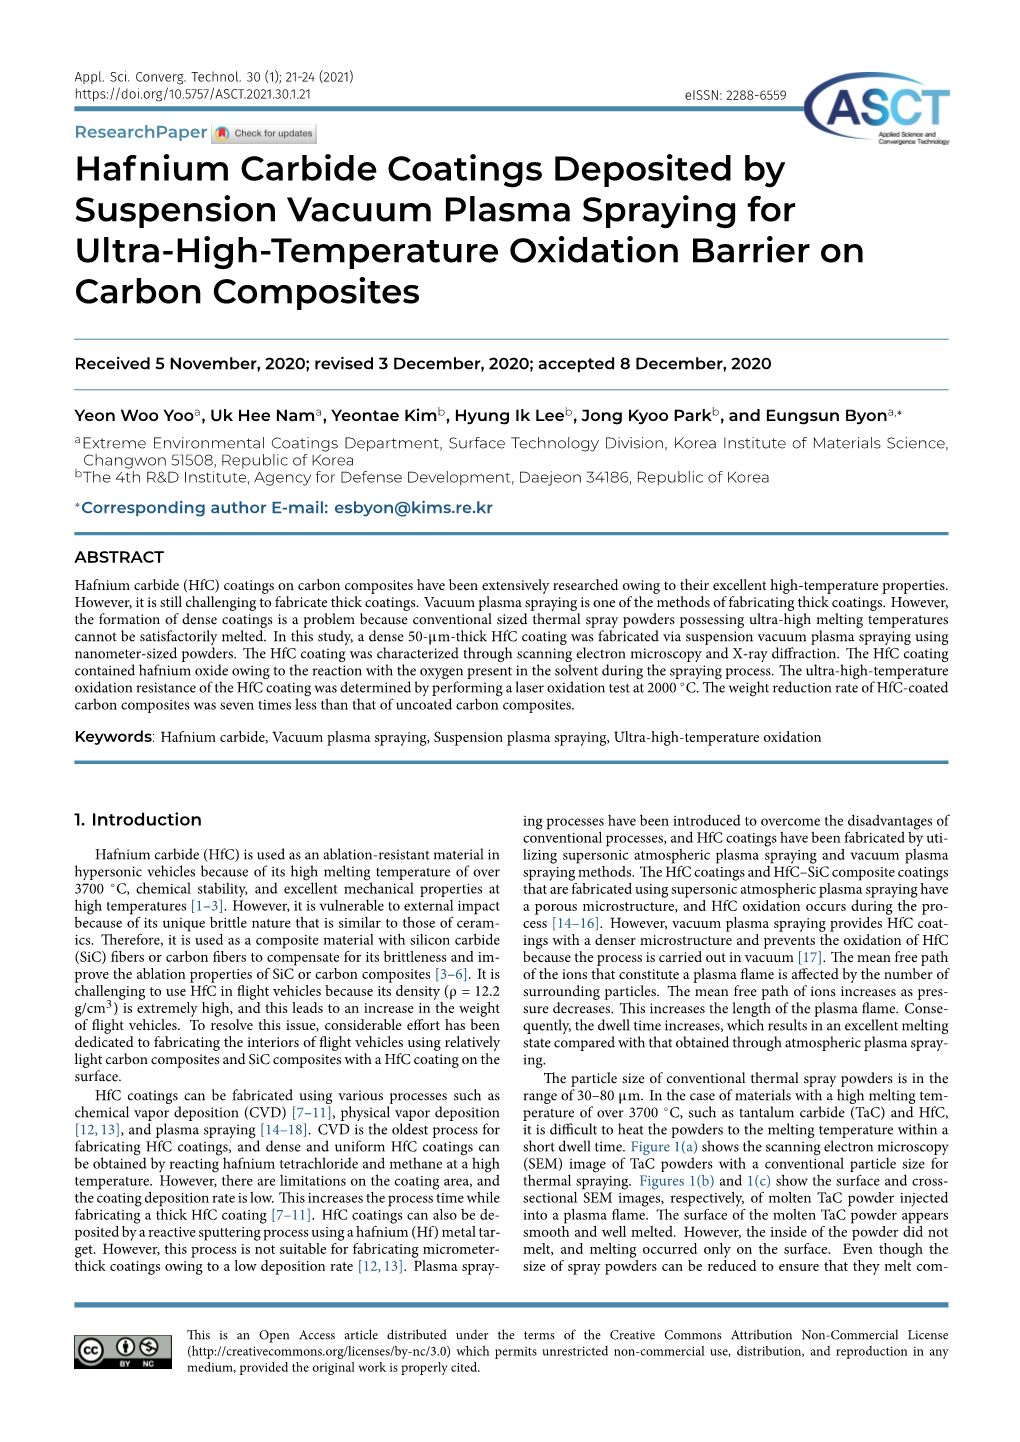 Hafnium Carbide Coatings Deposited by Suspension Vacuum Plasma Spraying for Ultra-High-Temperature Oxidation Barrier on Carbon Composites